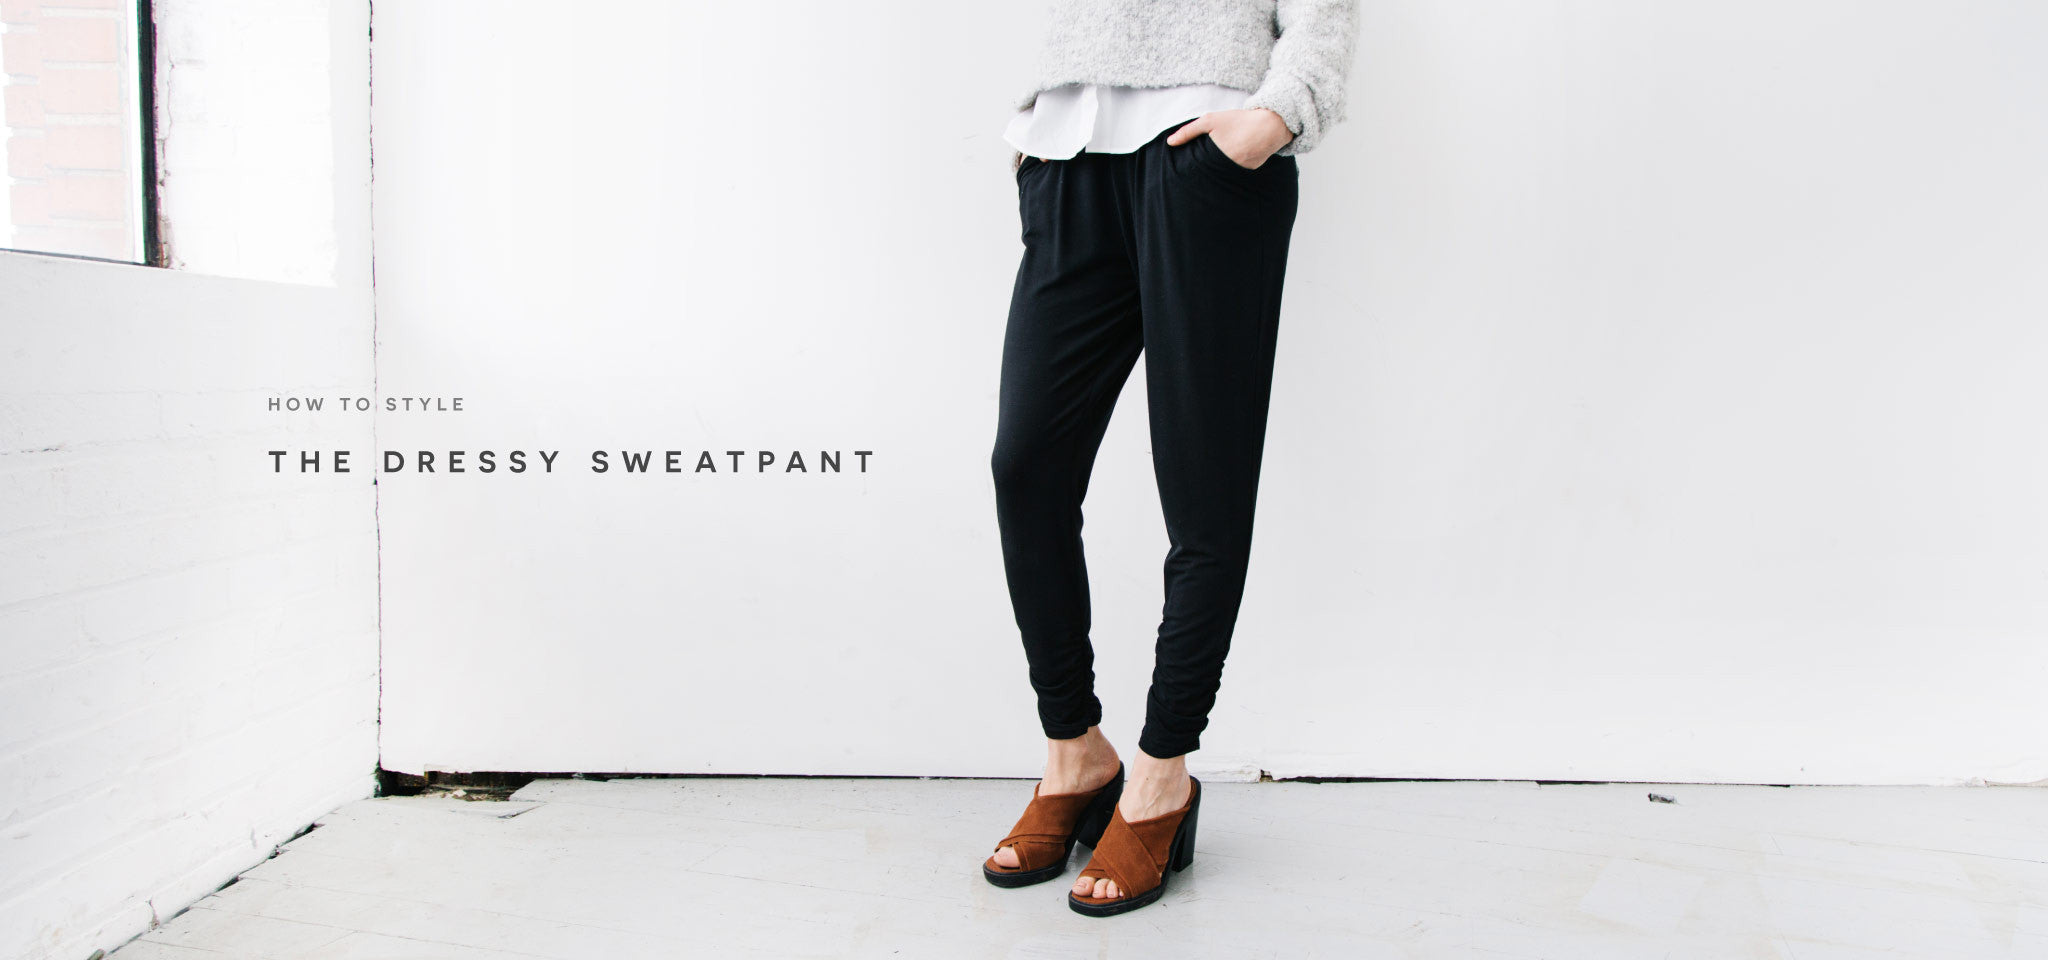 How to Wear The Dressy Sweatpant